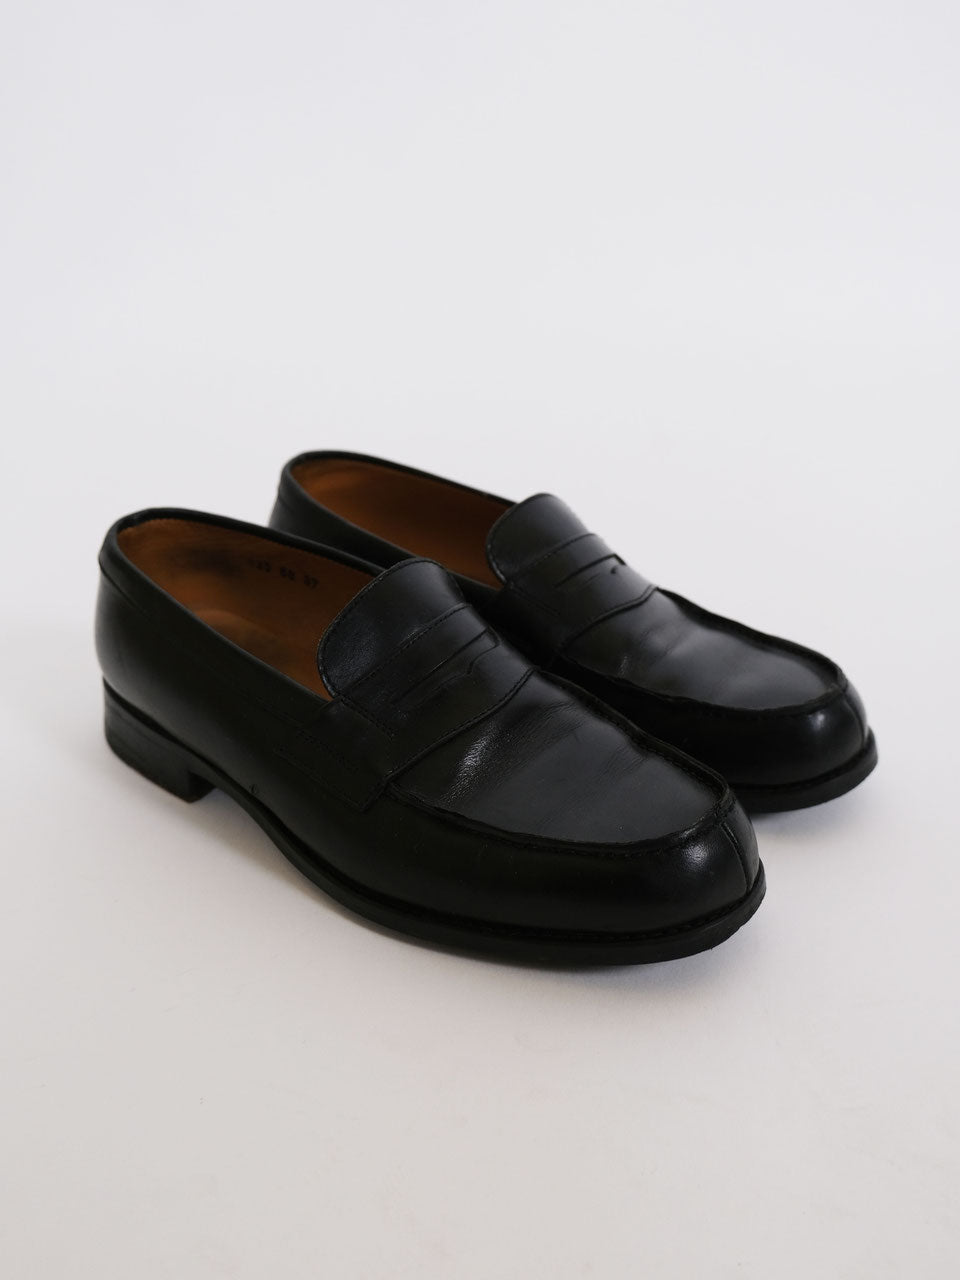 Leather loafers shoes black